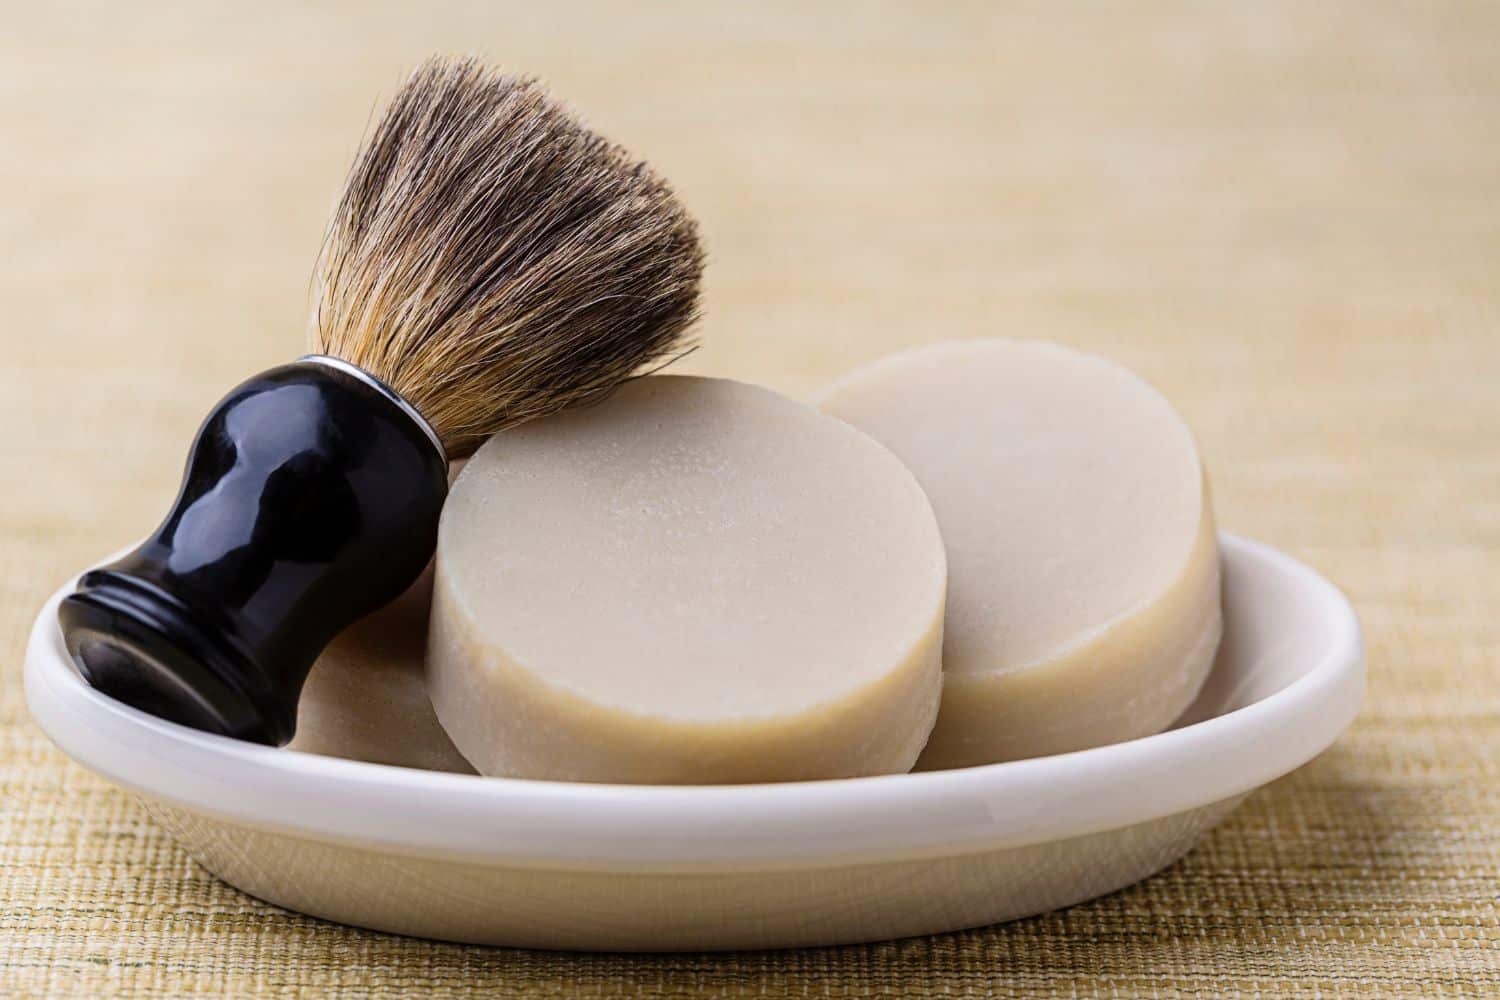 shaving brush and two soap discs on a tray